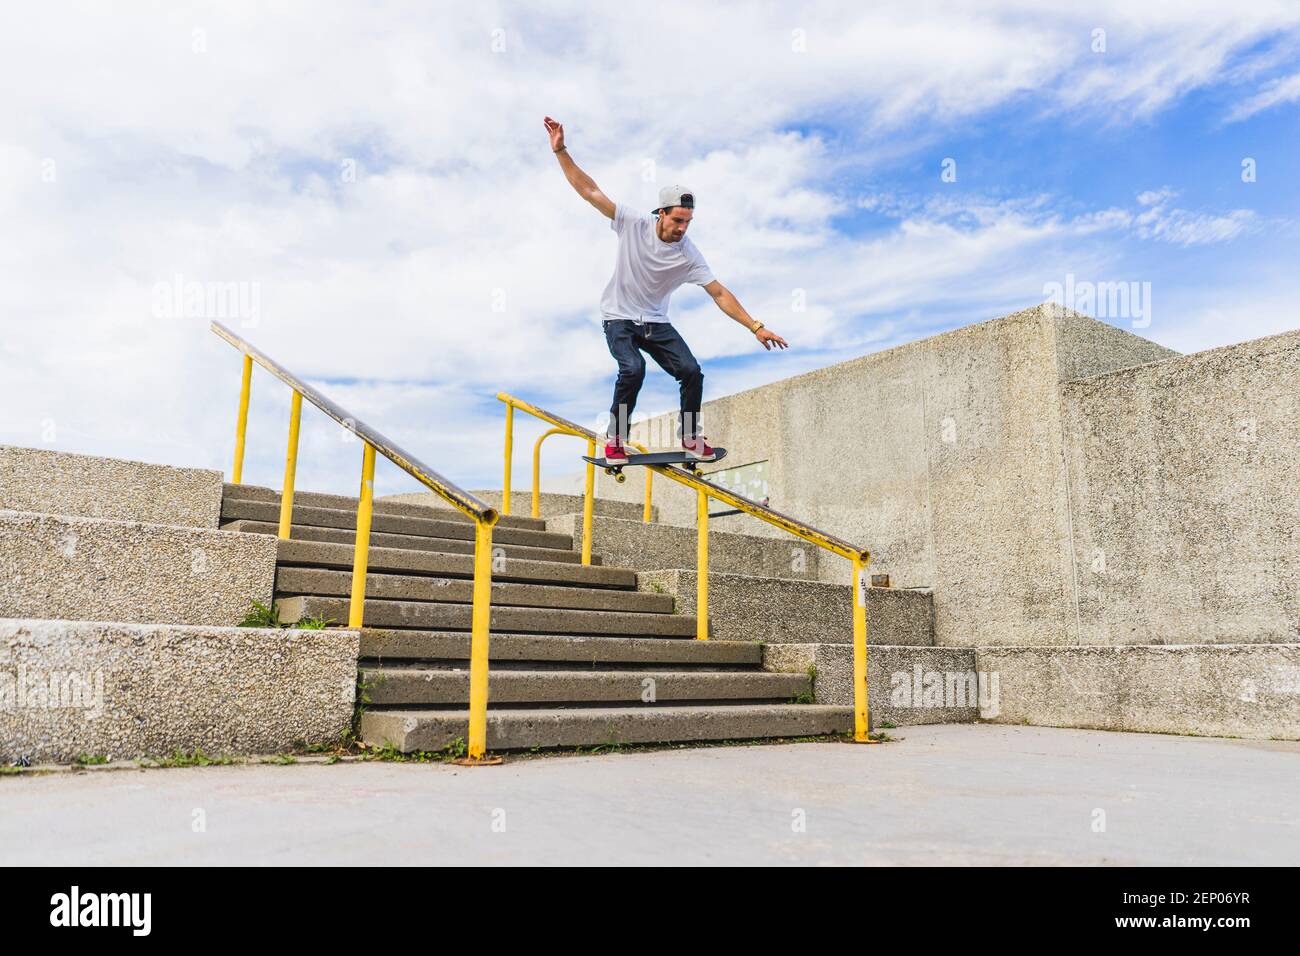 Young skateboarder sliding down handrail on skateboard, Montreal, Quebec,  Canada Stock Photo - Alamy